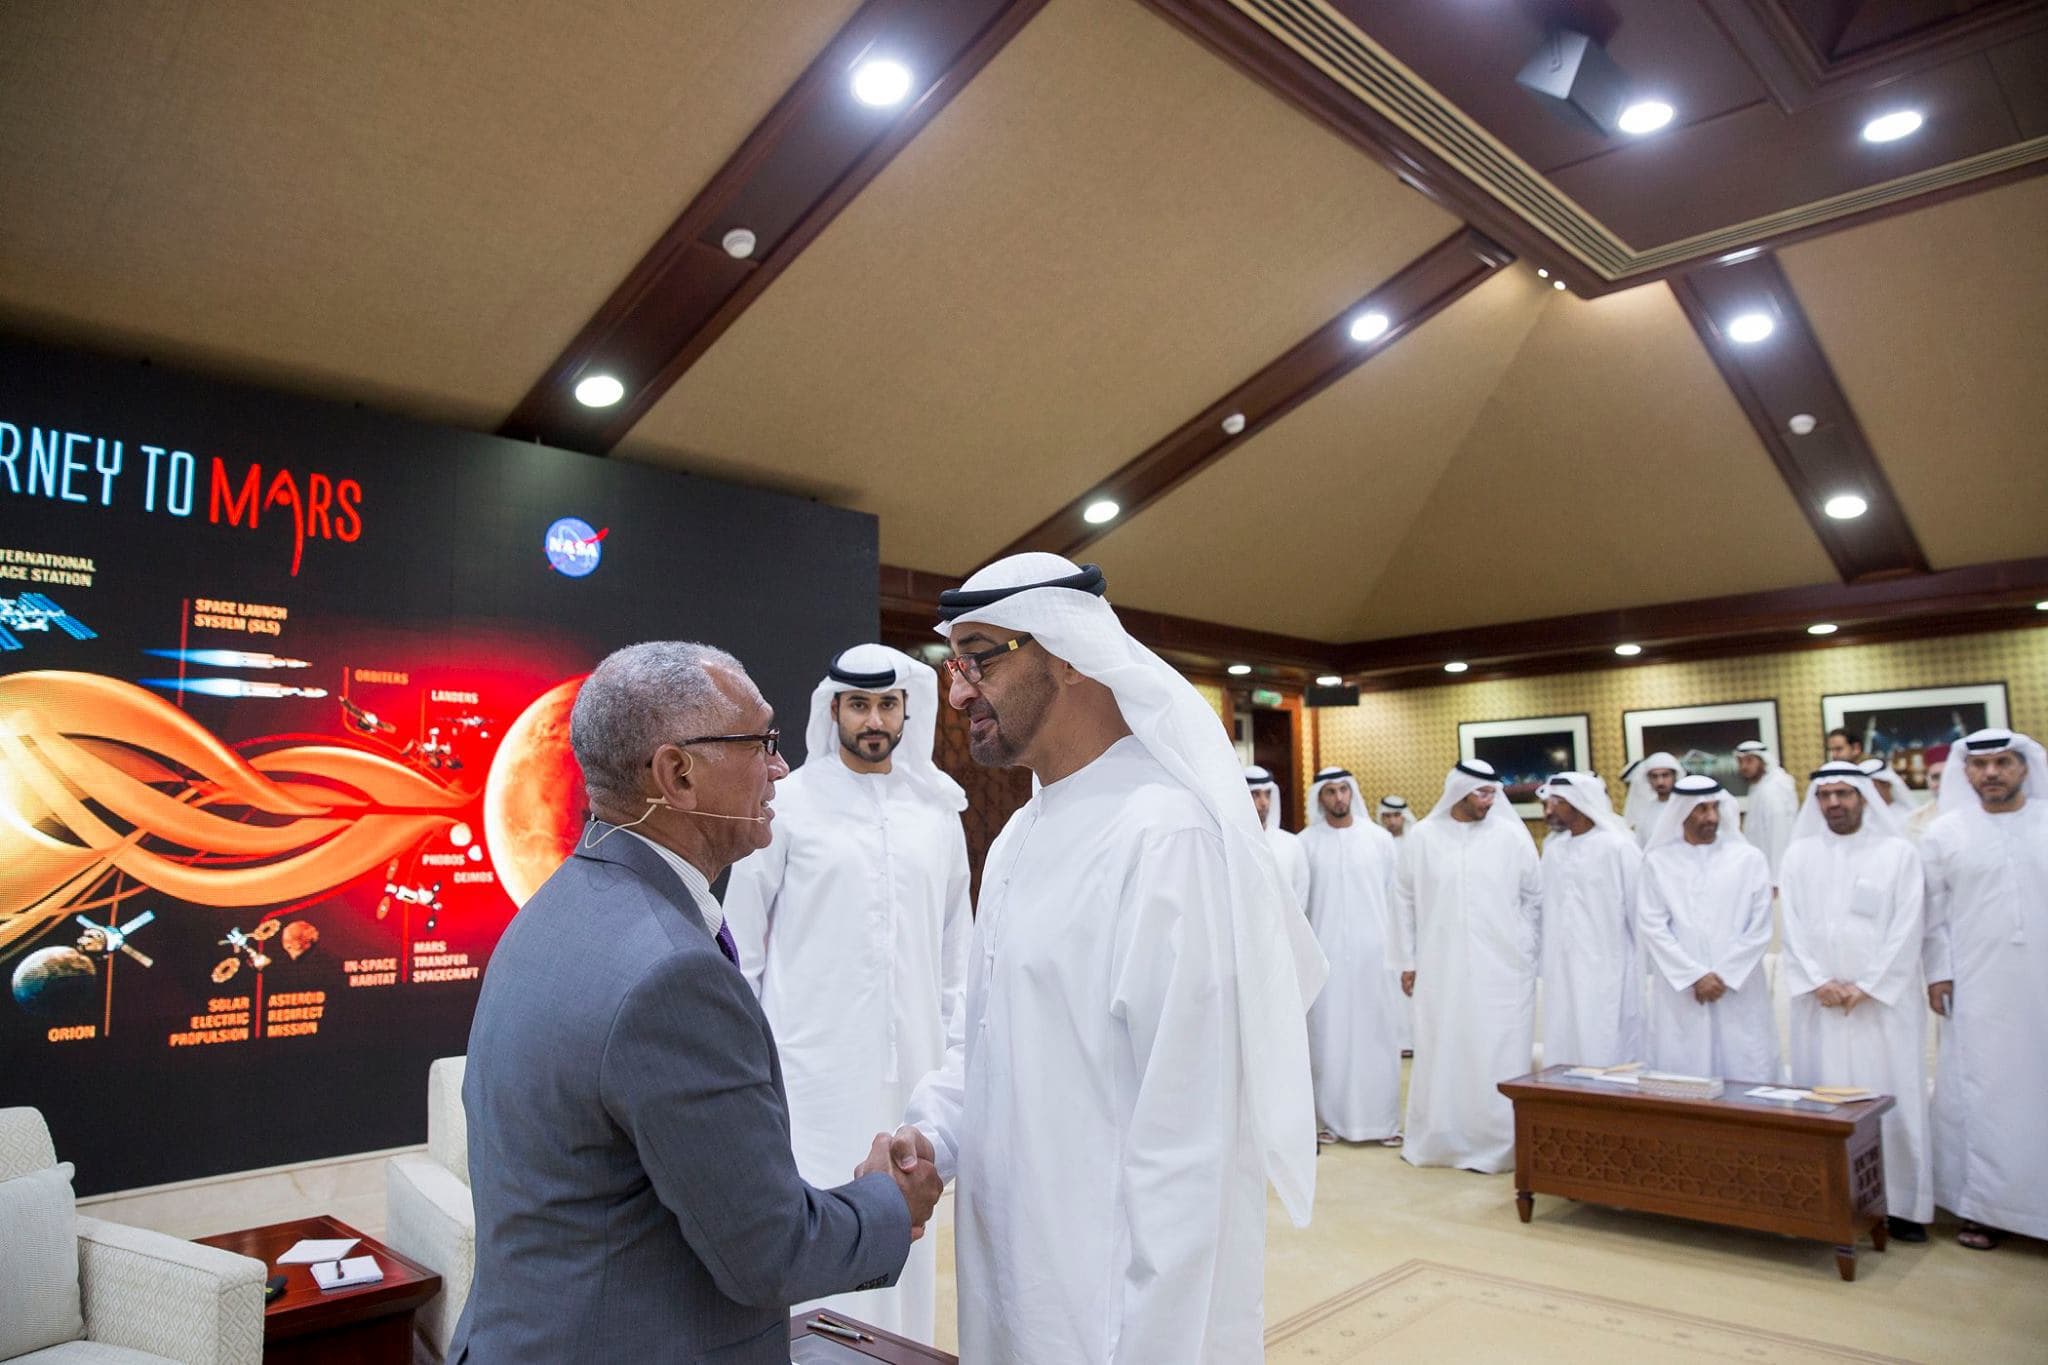 “We are going on a journey to Mars,“ NASA - National Aeronautics and Space Administration Administrator Charles Bolden said today to a #Ramadan Majlis audience that included Abu Dhabi Crown Prince and Deputy Supreme Commander of the #UAE Armed Forces, His Highness Sheikh Mohamed bin Zayed Al Nahyan, discussing how the United Arab Emirates and United States can work together on #Mars missions and to further space exploration and technology, “You’re going to help us turn the impossible into the possible and s